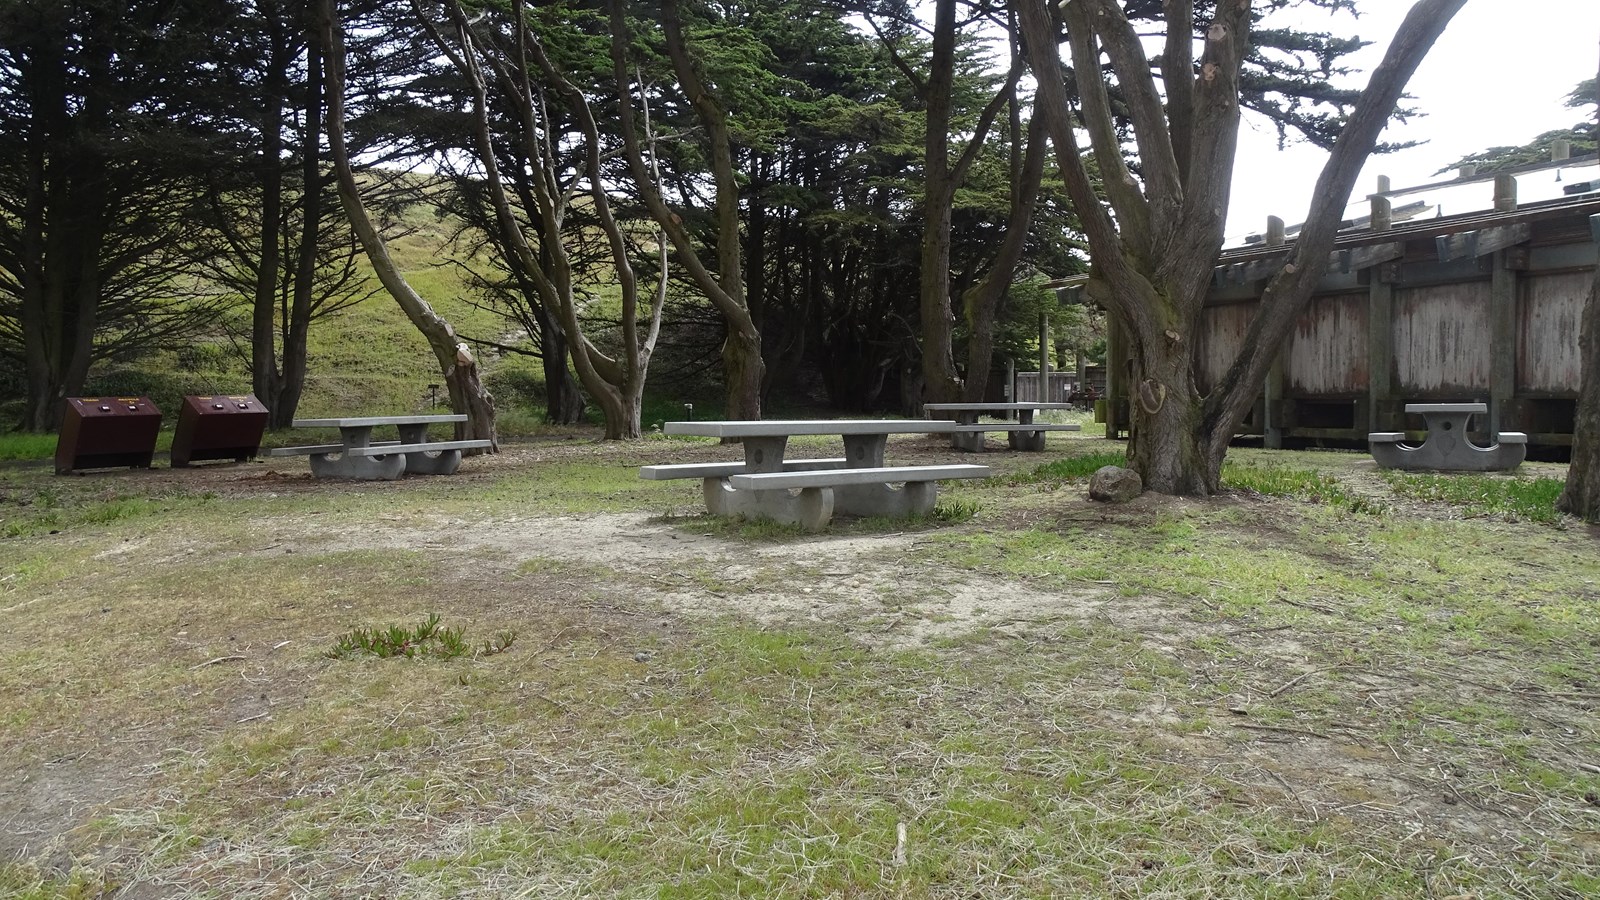 Four concrete picnic tables under cypress trees next to a wooden building.